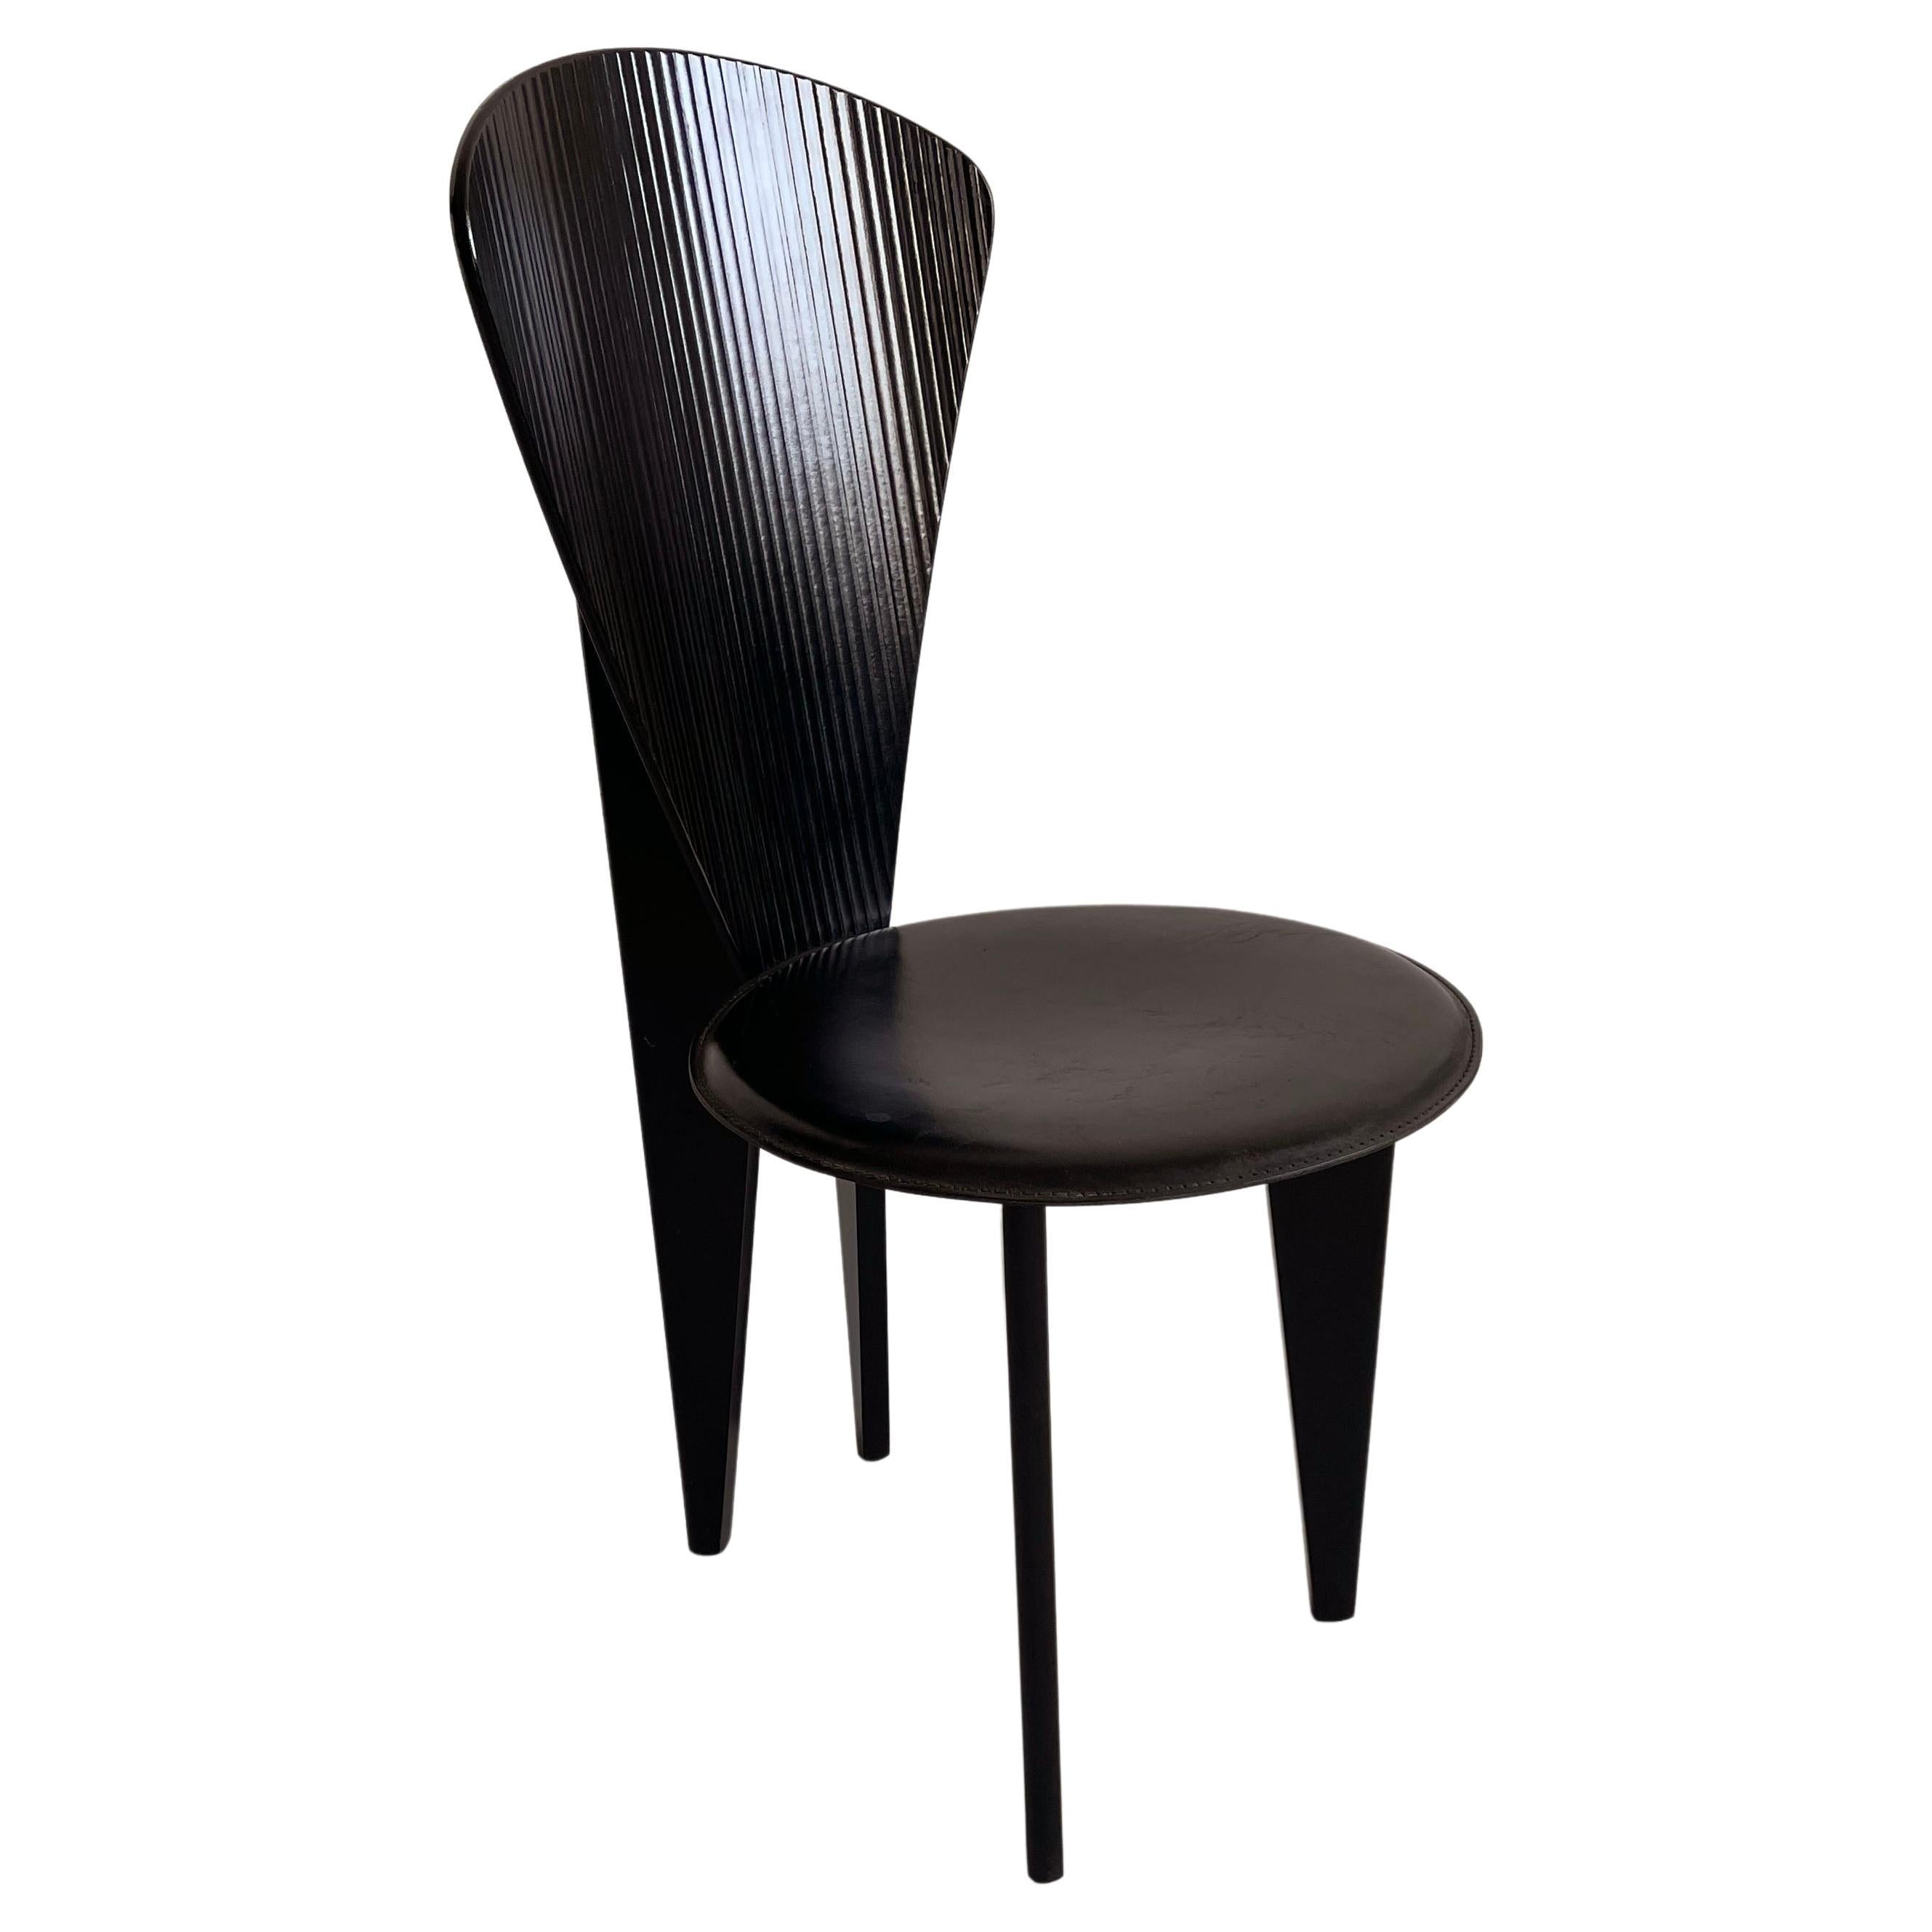 Postmodern Italian Calligaris Dining Chair, Black Leather and Wood, 1980s